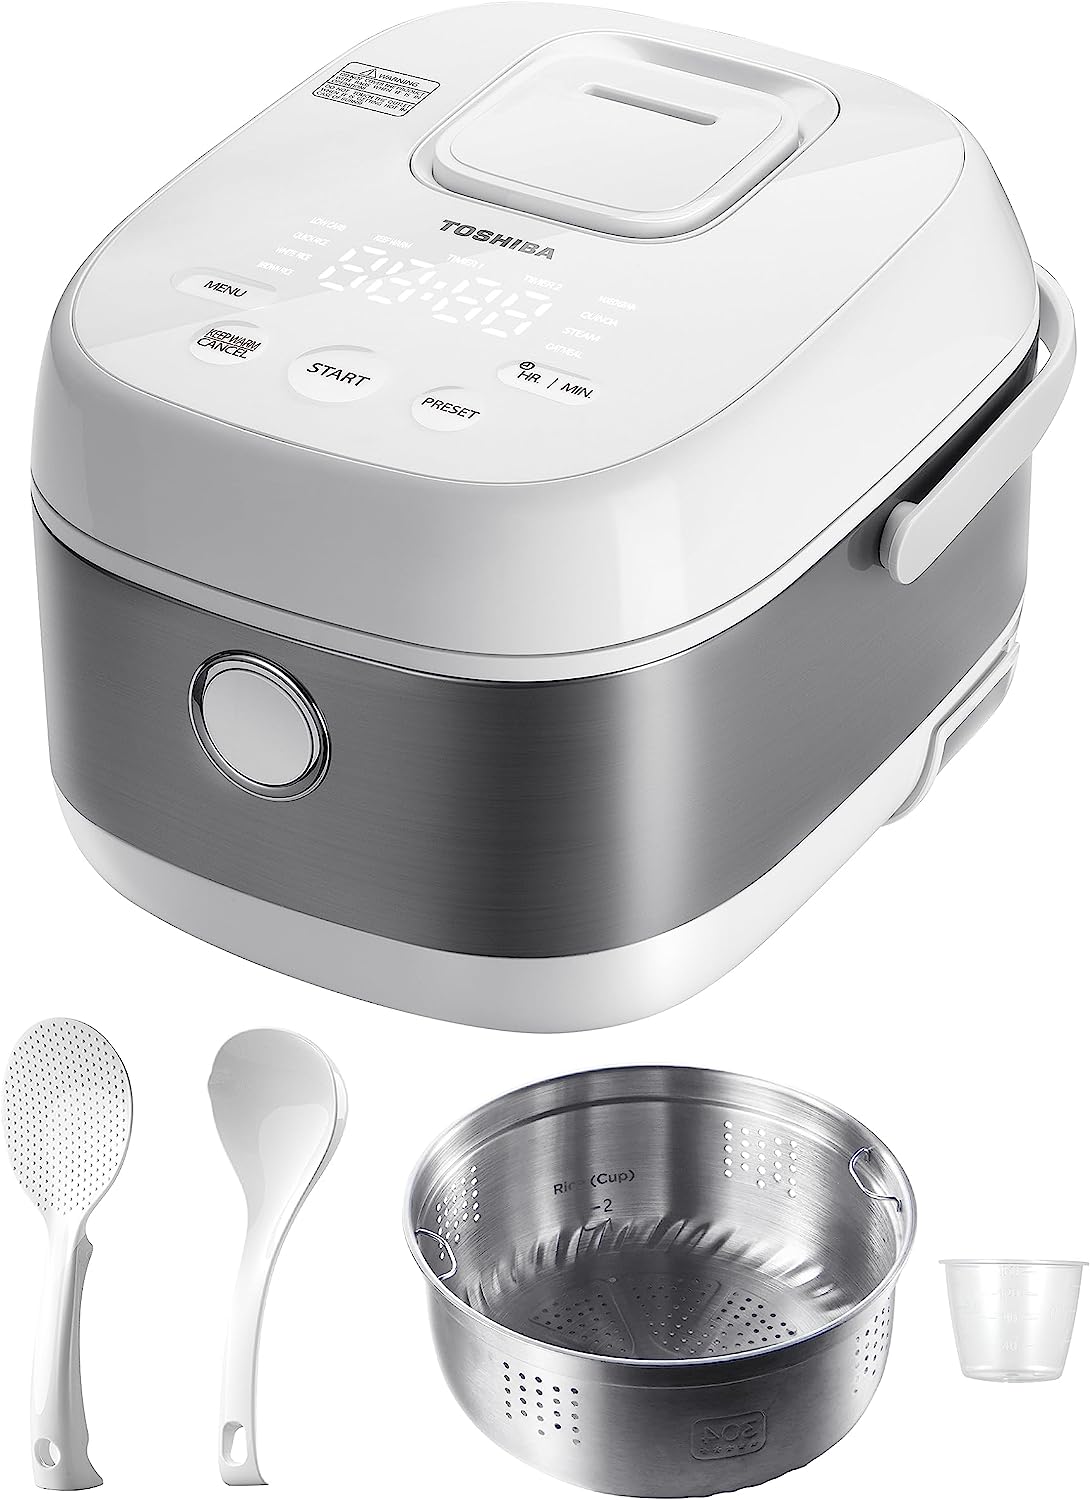 https://bigbigmart.com/wp-content/uploads/2023/08/Toshiba-Induction-Low-Carb-Rice-Cooker-Steamer-5.5-Cups-Uncooked-%E2%80%93-Japanese-Rice-Cooker-with-Fuzzy-Logic-Technology-8-Cooking-Functions-24-Hr-Timer-and-Auto-Keep-Warm-White.jpg